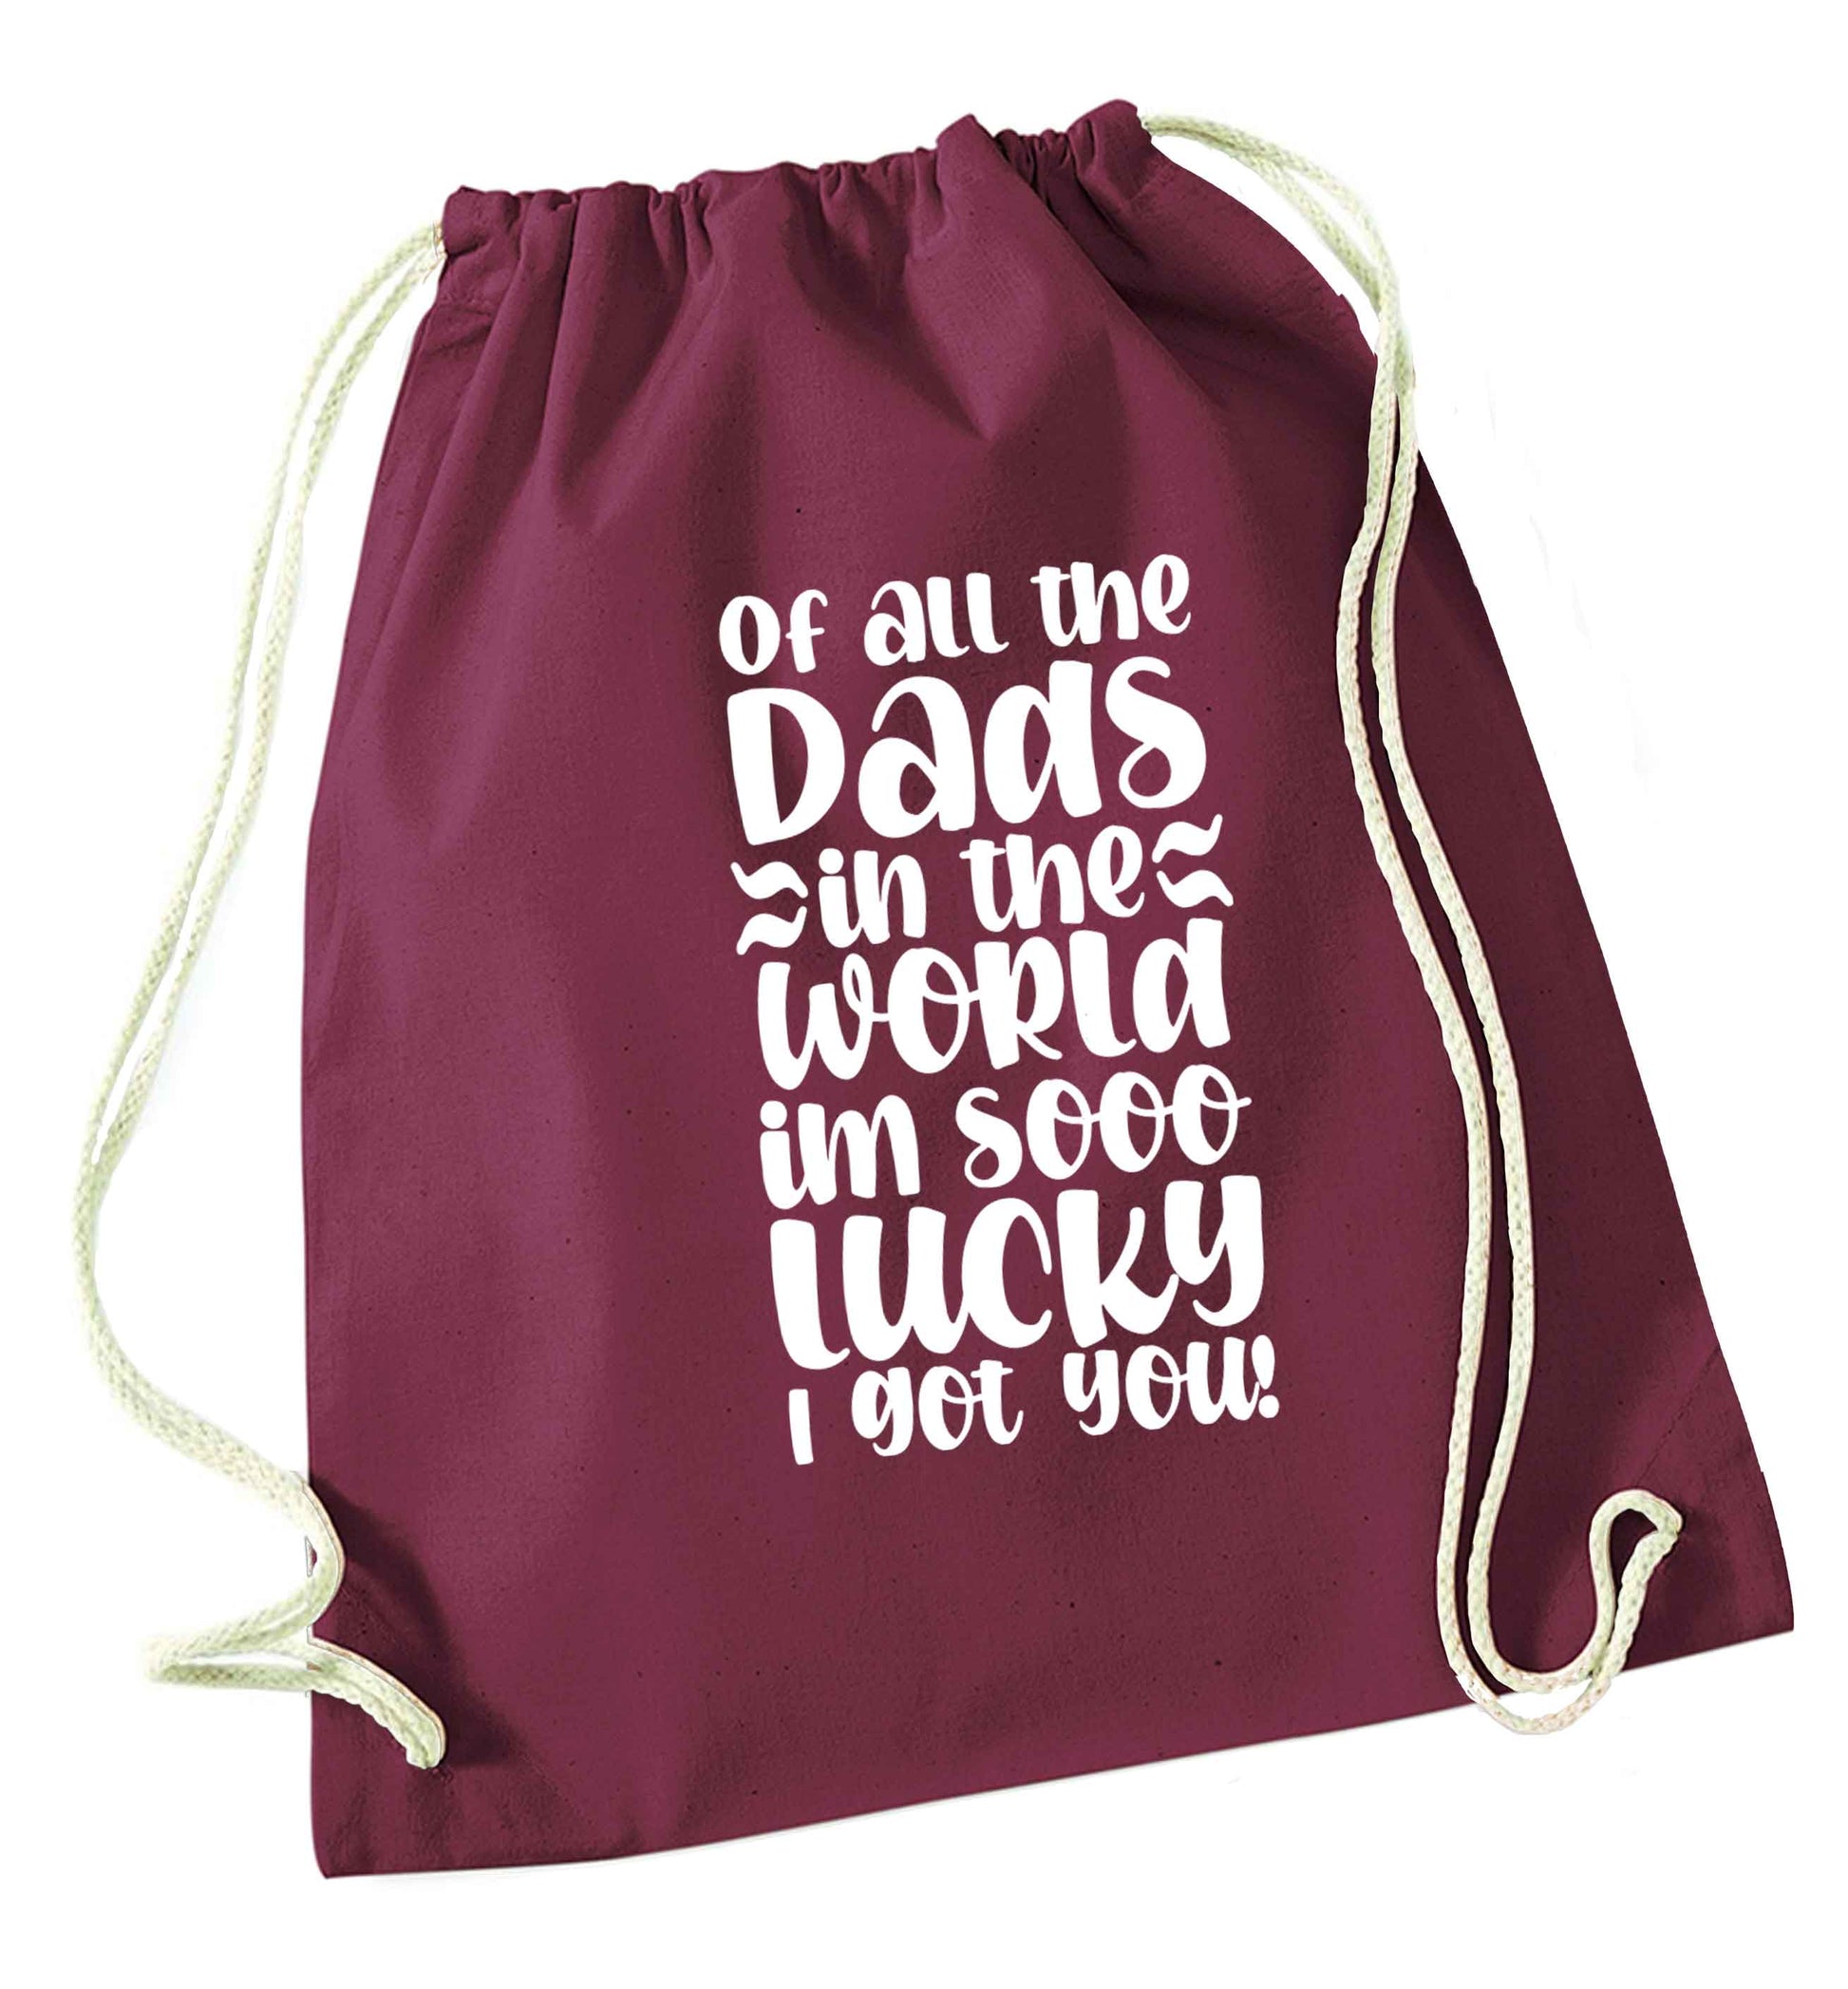 Of all the Dads in the world I'm so lucky I got you maroon drawstring bag